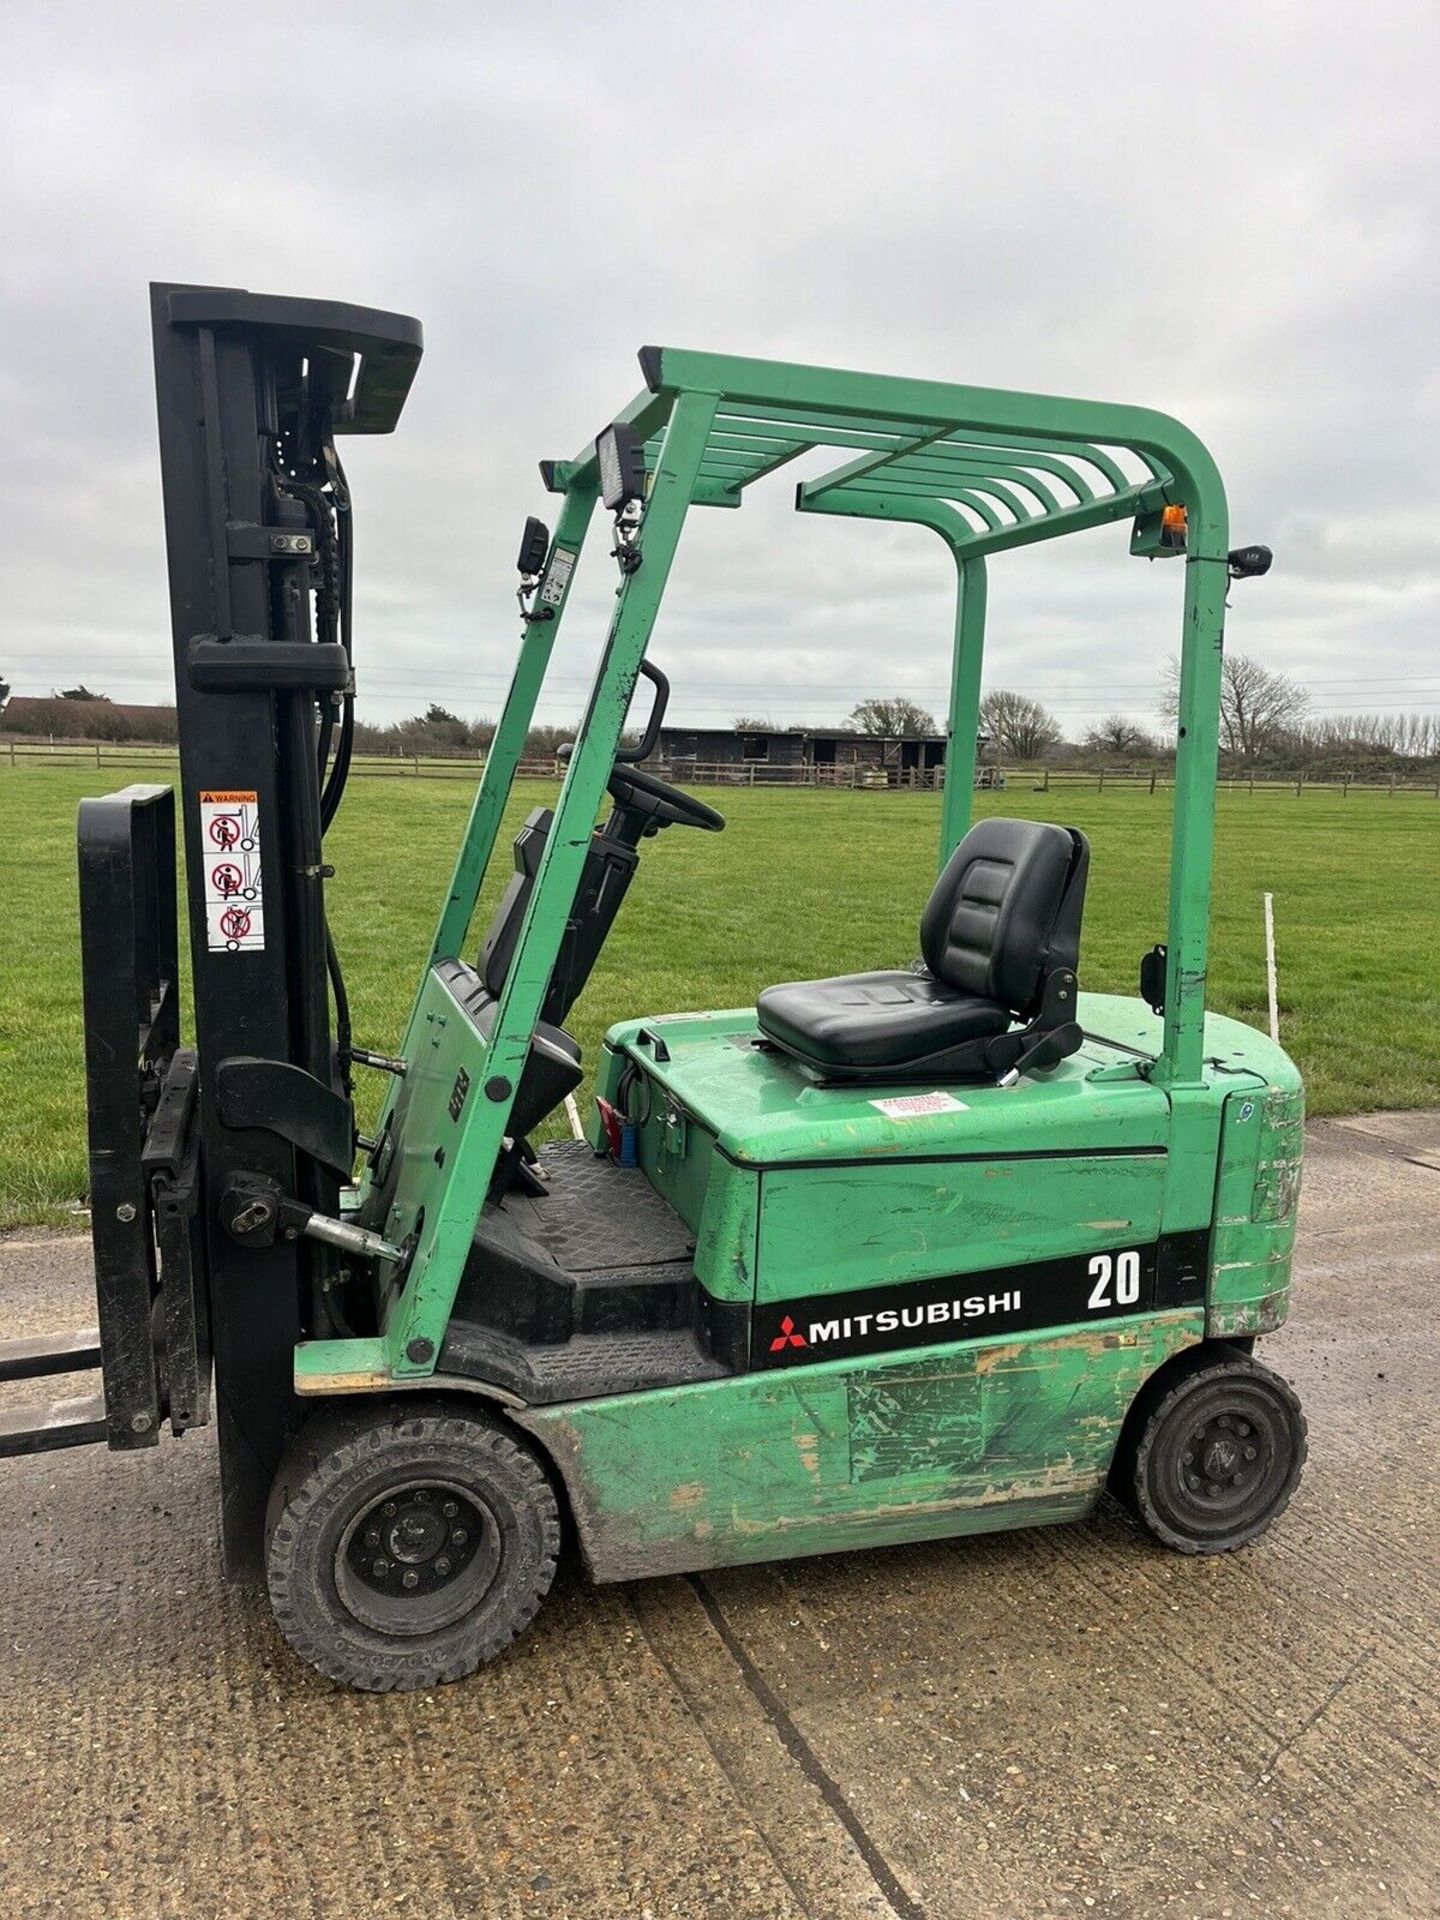 MITSUBISHI 2 Tonne (Container Spec) Electric Forklift Truck - Image 3 of 3